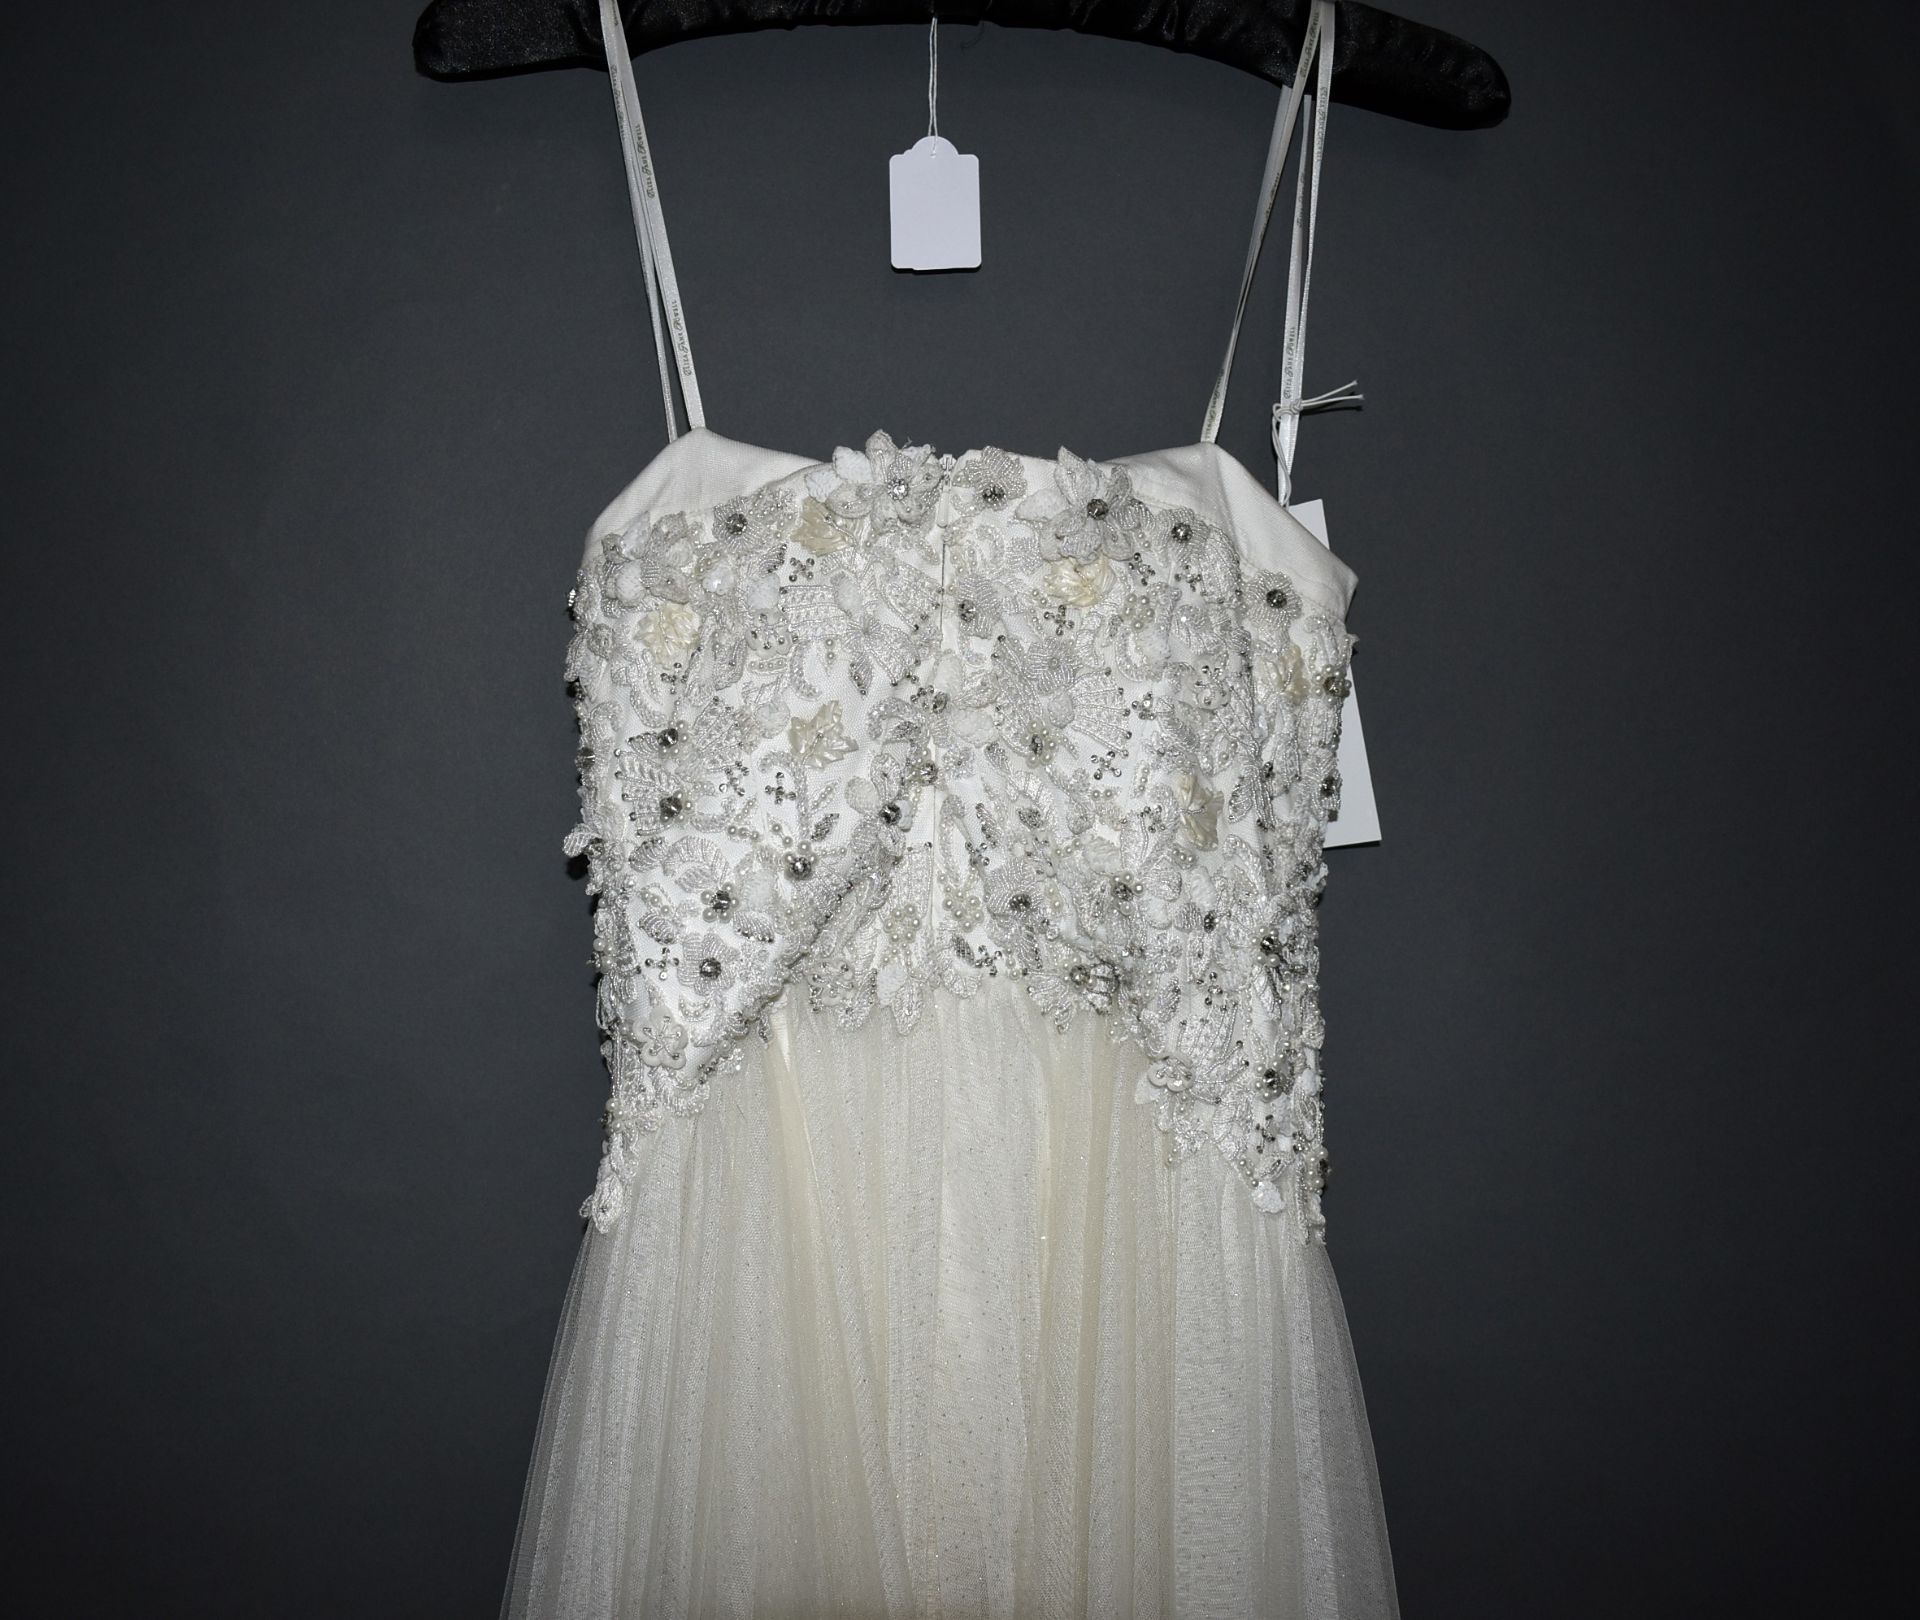 1 x ELIZA JANE HOWELL Lace And Beaded Strapless Designer Wedding Dress Bridal Gown RRP £1,000 UK 12 - Image 7 of 7